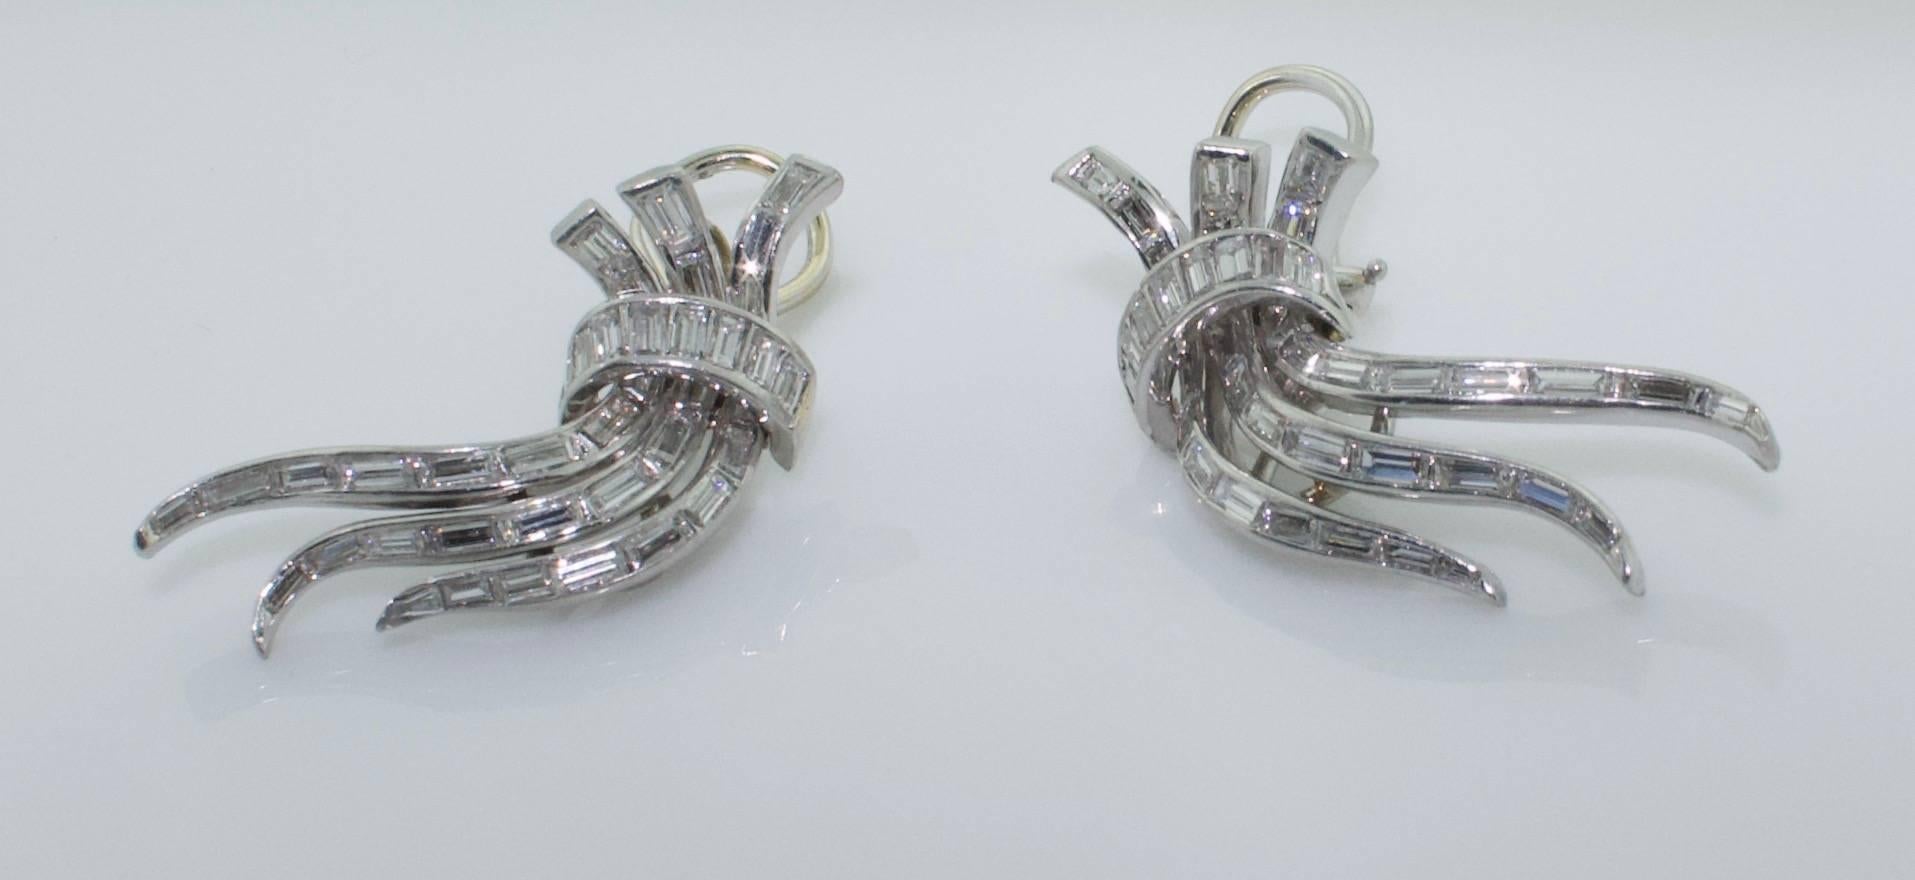 Diamond Earring in Platinum  Circa 1940's
Handmade with a Left and Right Earring.  Which is which is Up To You!
Currently Clip Back.  A Post Can Easily Be Added by Us or by a Qualified Jeweler
65 Baguettes  = 3.20 carets, Color GH Clarity